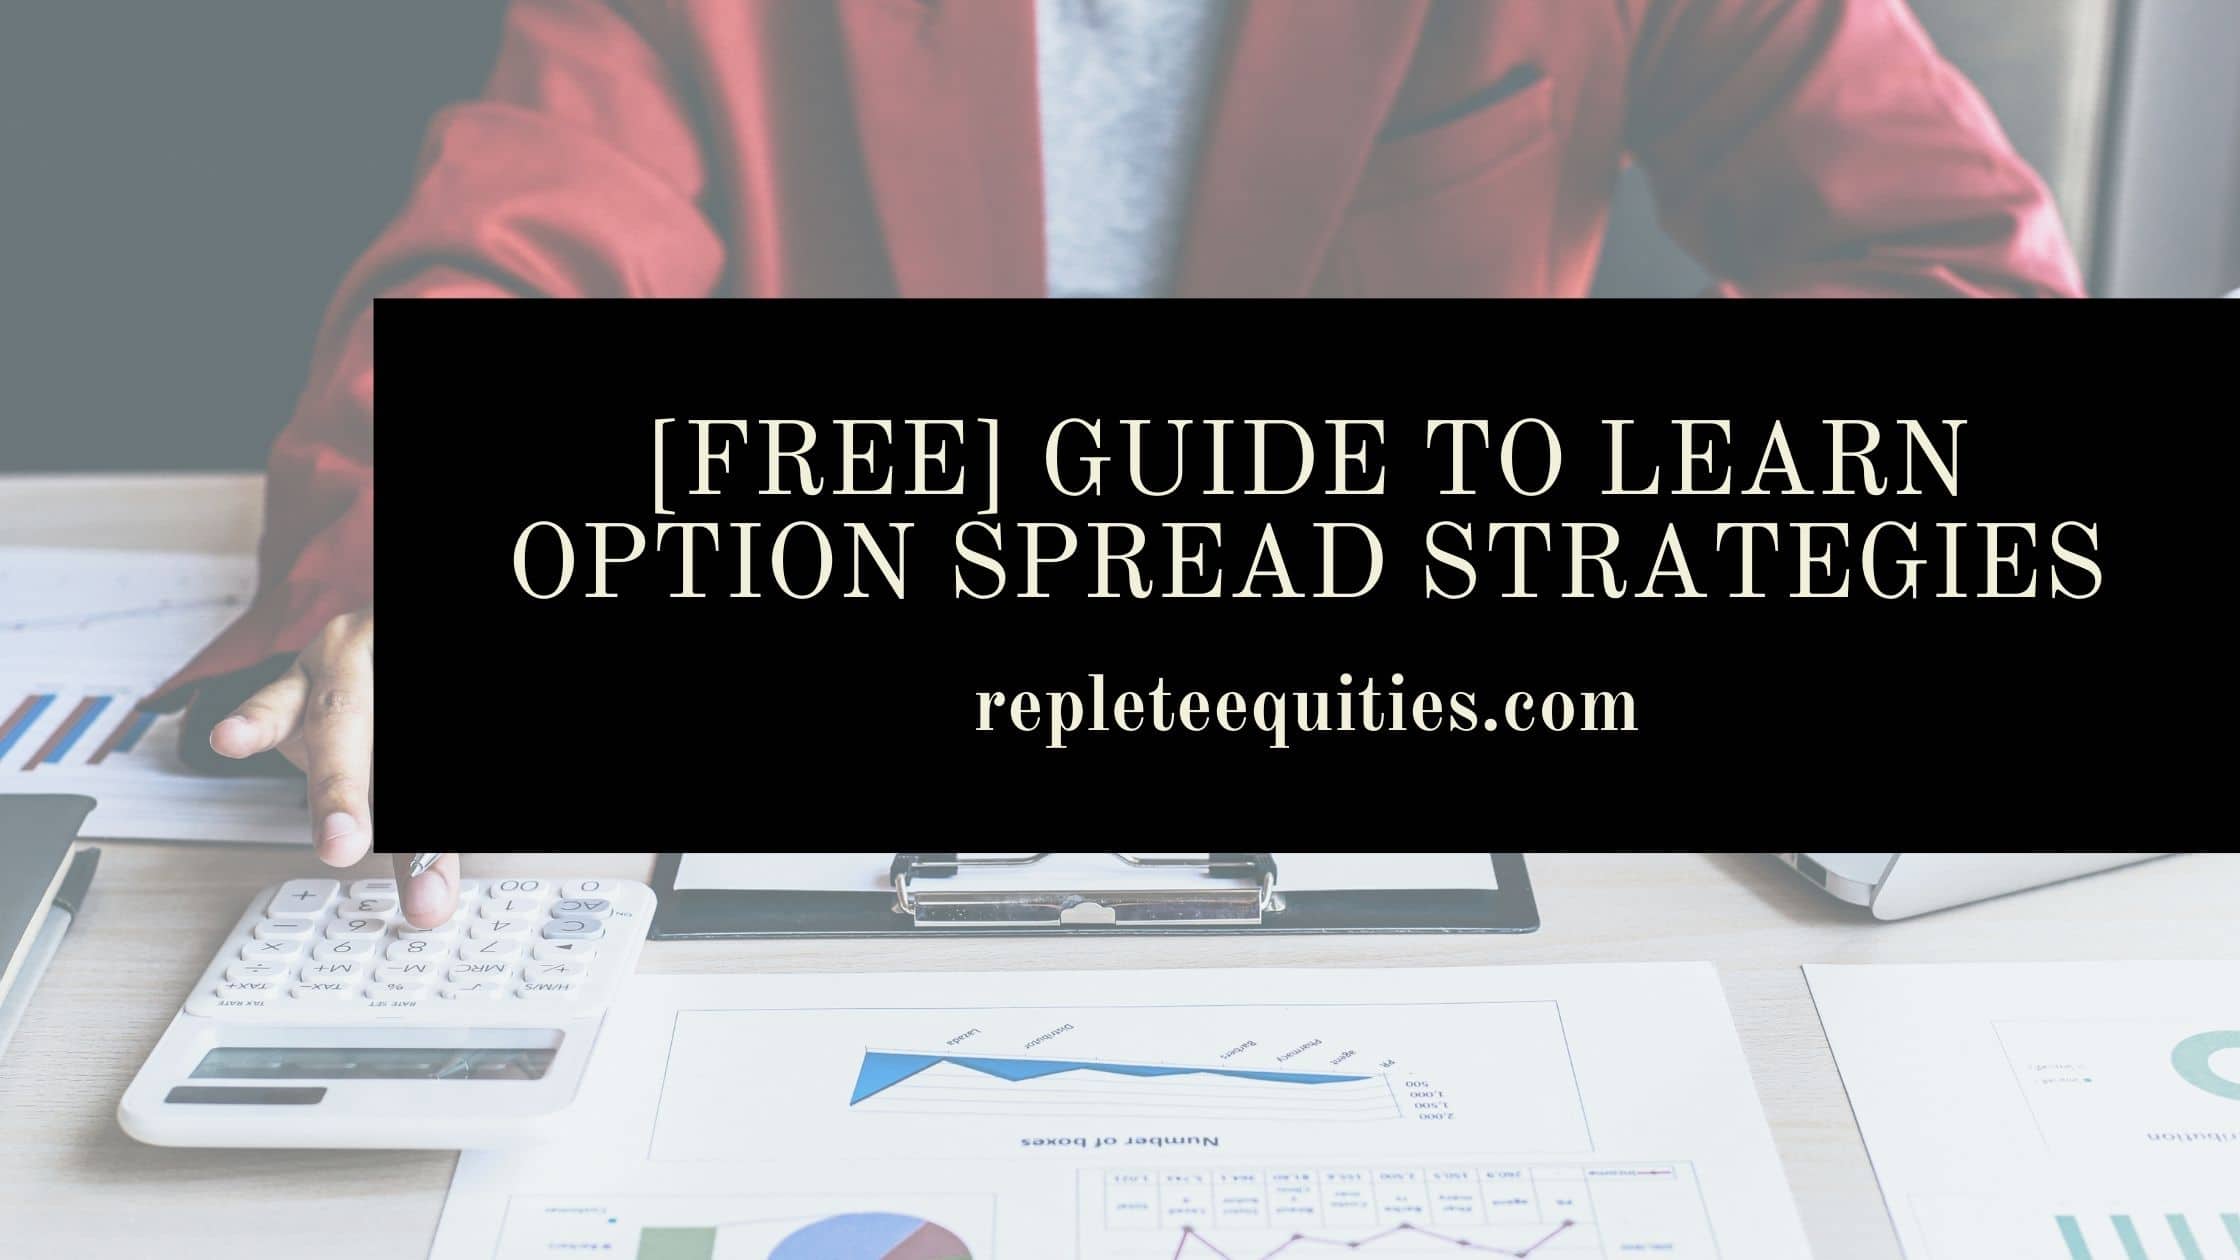 Best Guide to Learn Option Spread Strategies for [FREE]